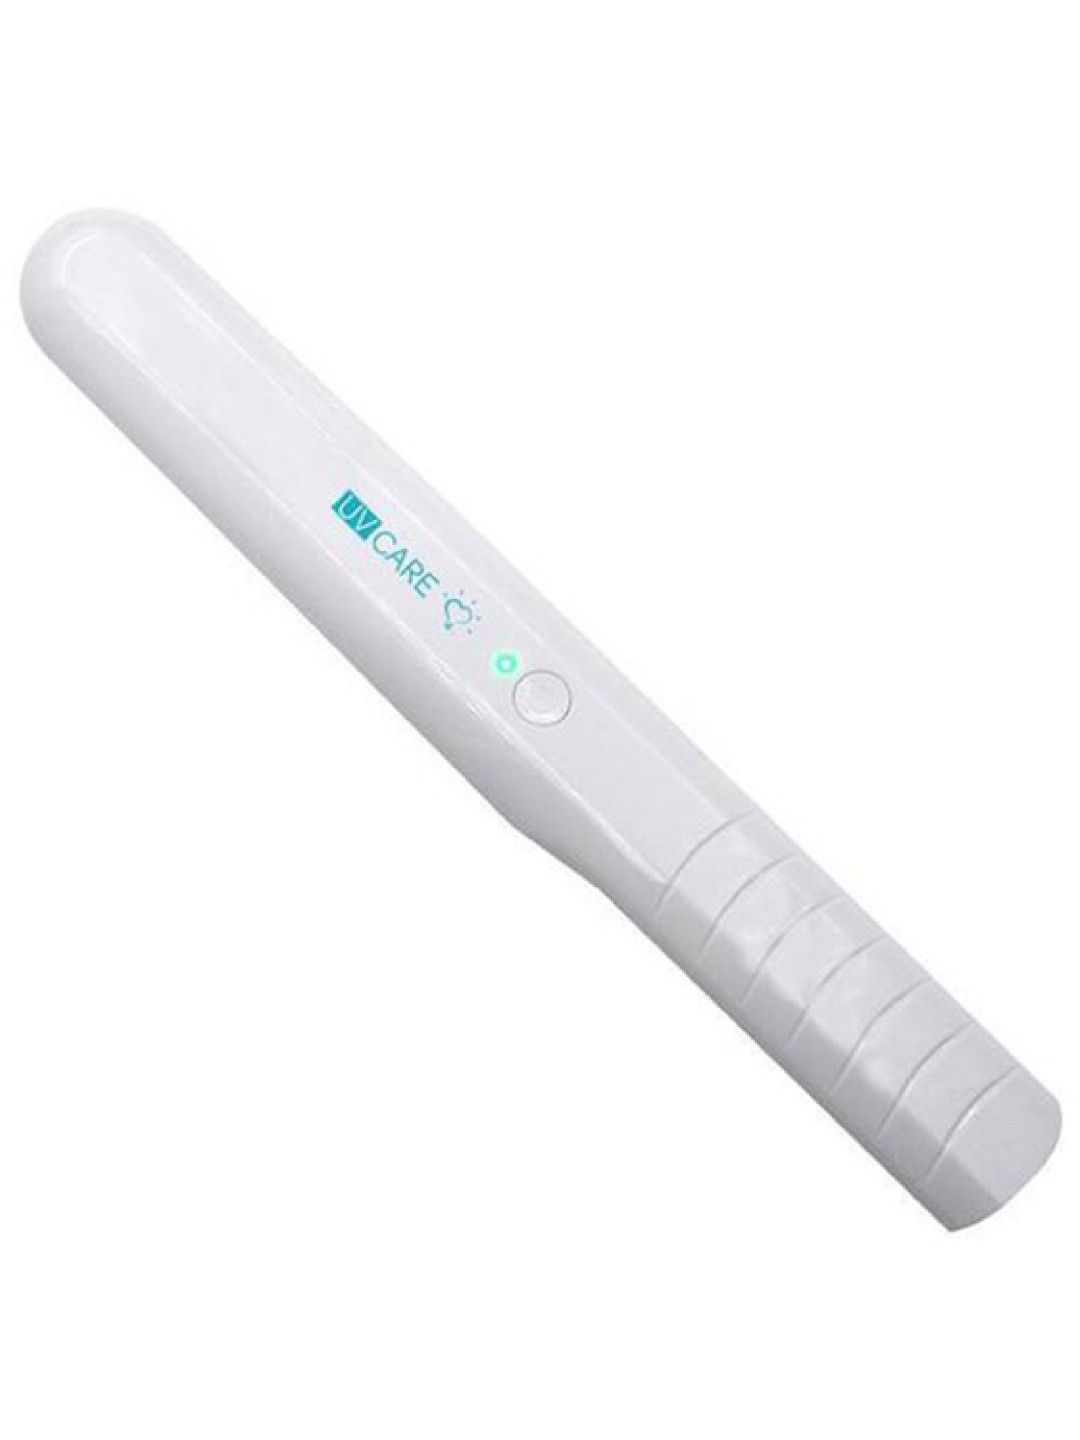 UV Care Germ Stick (Rechargeable)